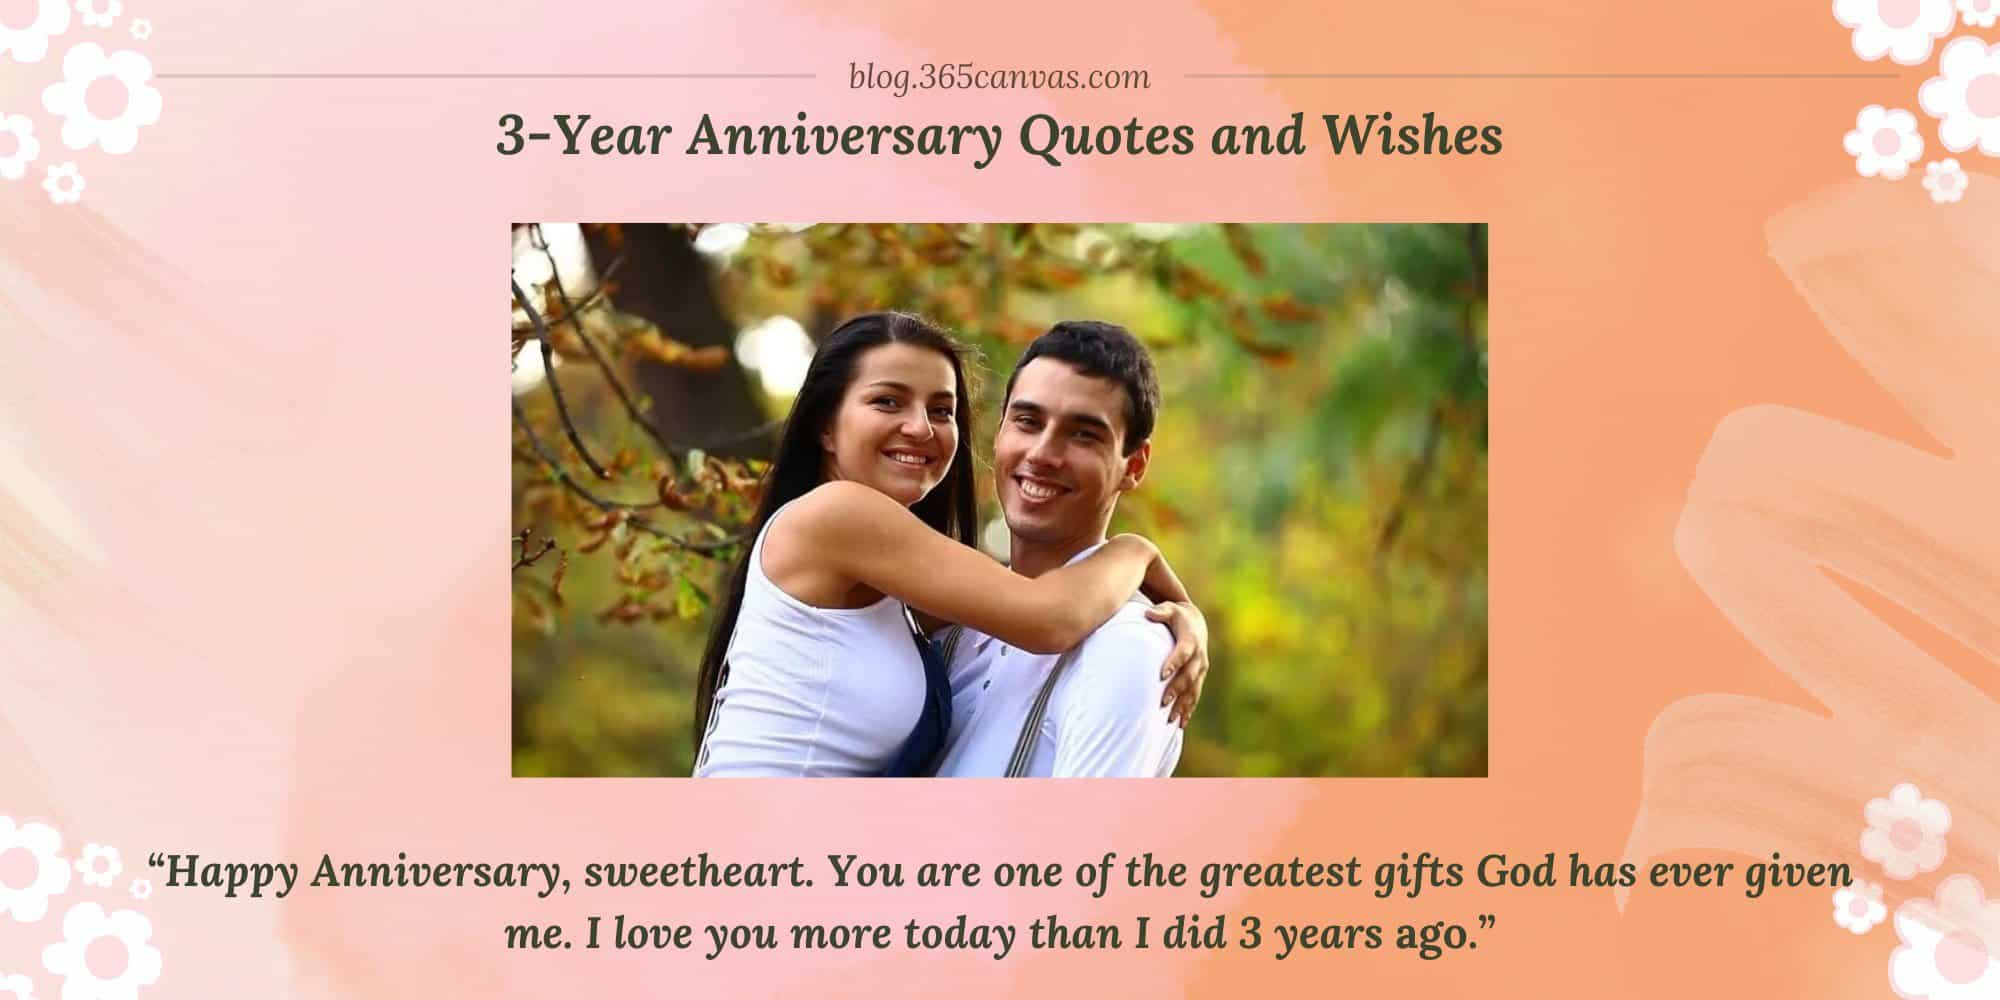 100+ Best 3rd Year Leather Wedding Anniversary Quotes, Wishes and Messages